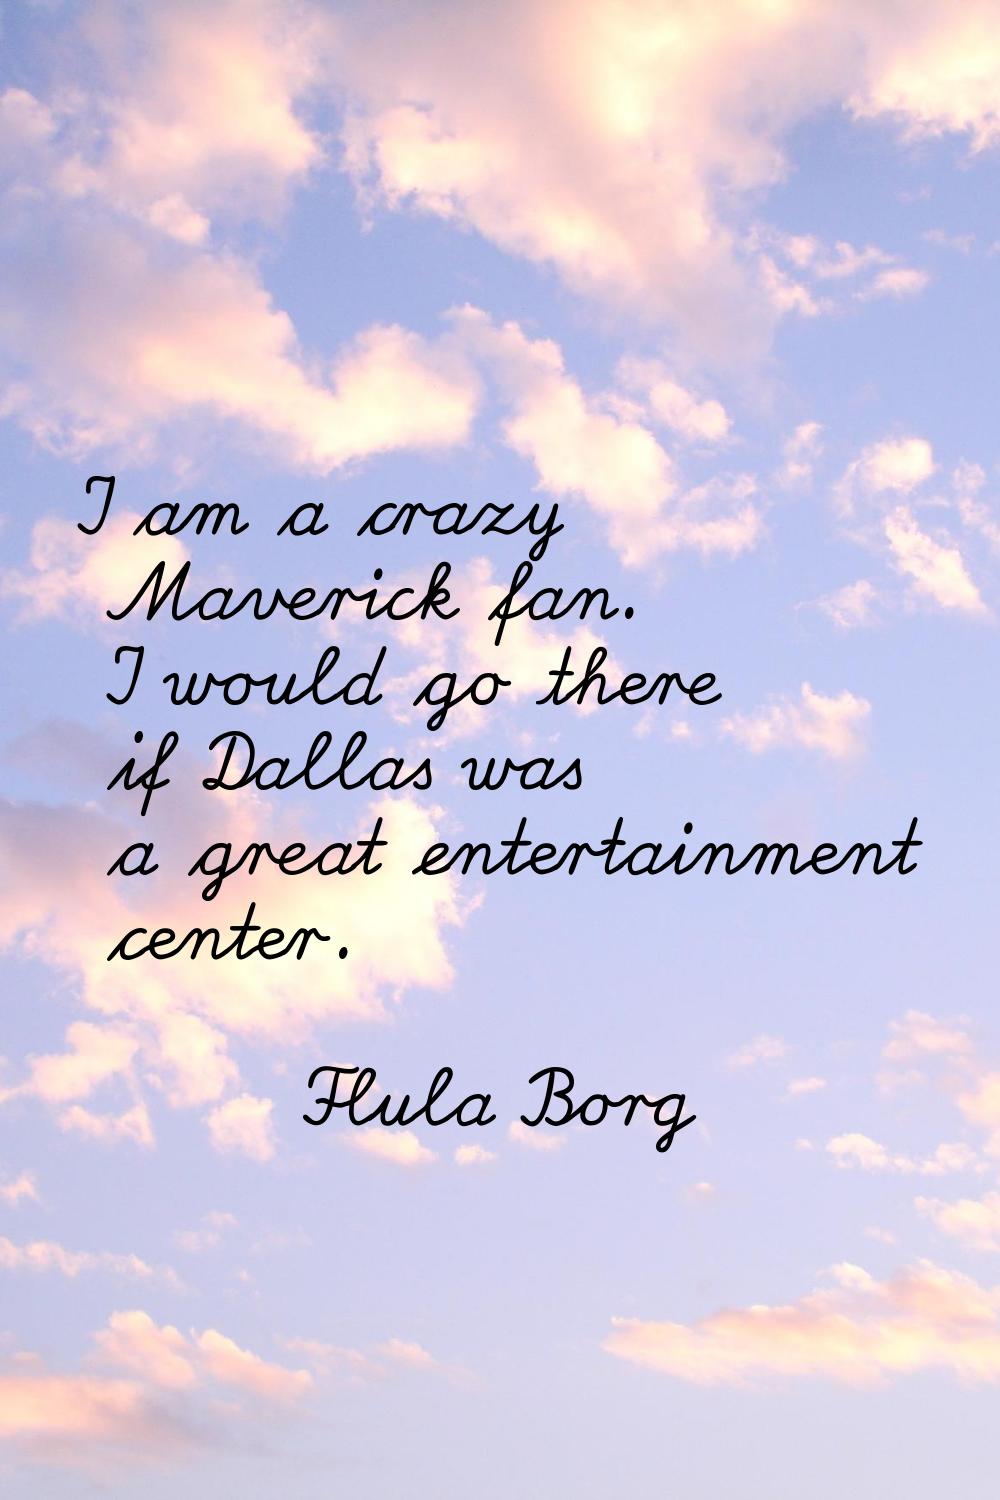 I am a crazy Maverick fan. I would go there if Dallas was a great entertainment center.